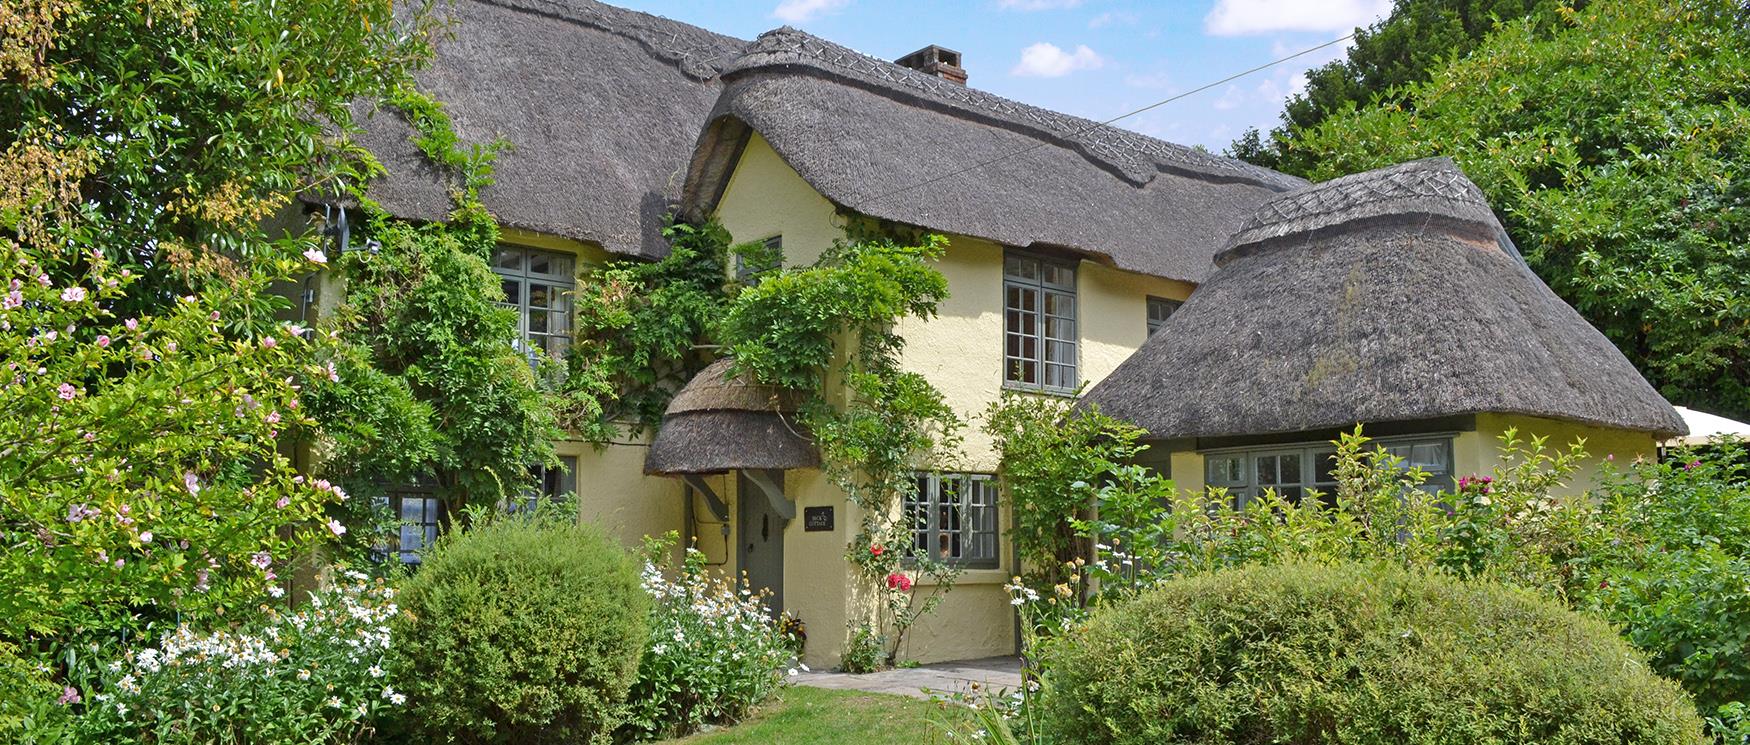 Thatched Holiday Cottage in Hampshire